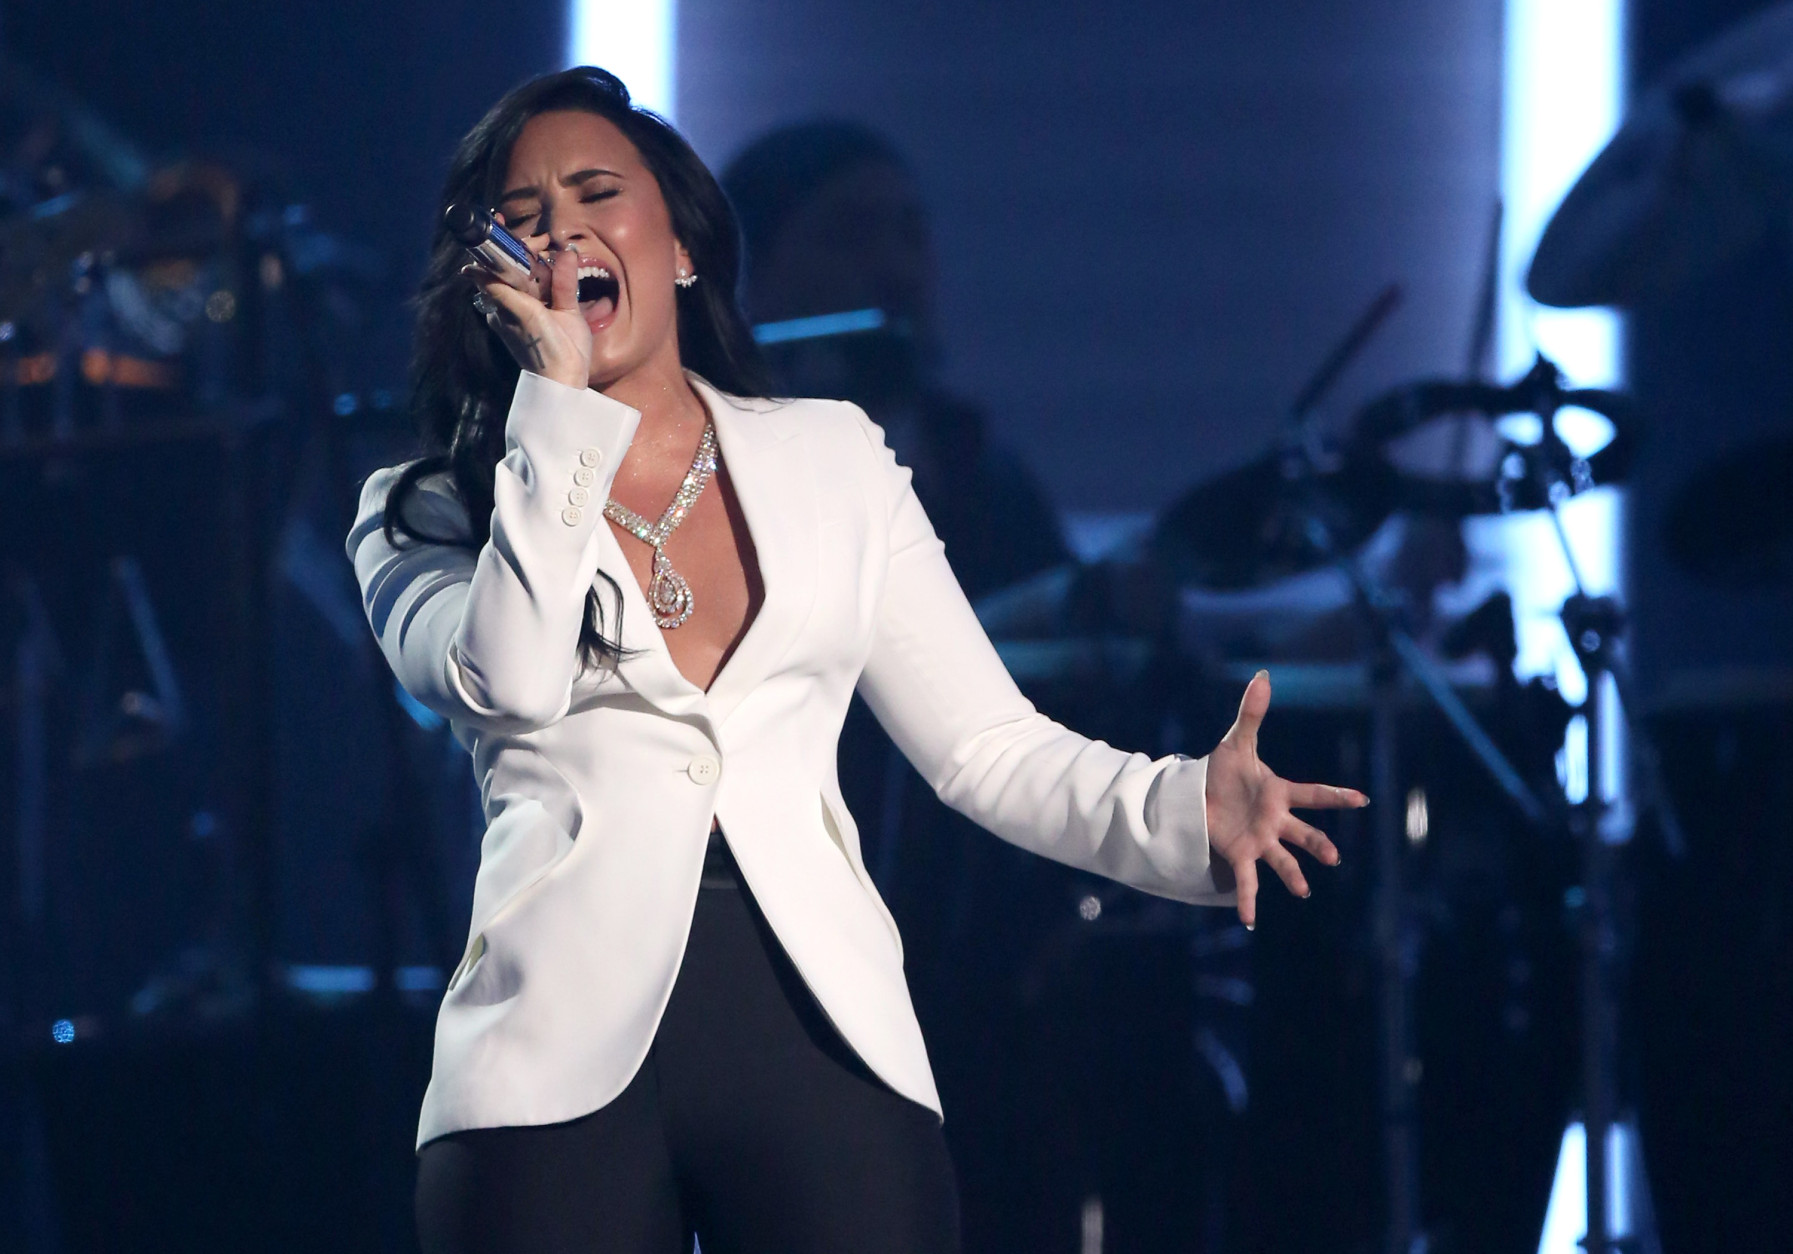 Demi Lovato performs "Hello" during a tribute to MusiCares Person of the Year honoree Lionel Richie at the 58th annual Grammy Awards on Monday, Feb. 15, 2016, in Los Angeles. (Photo by Matt Sayles/Invision/AP)